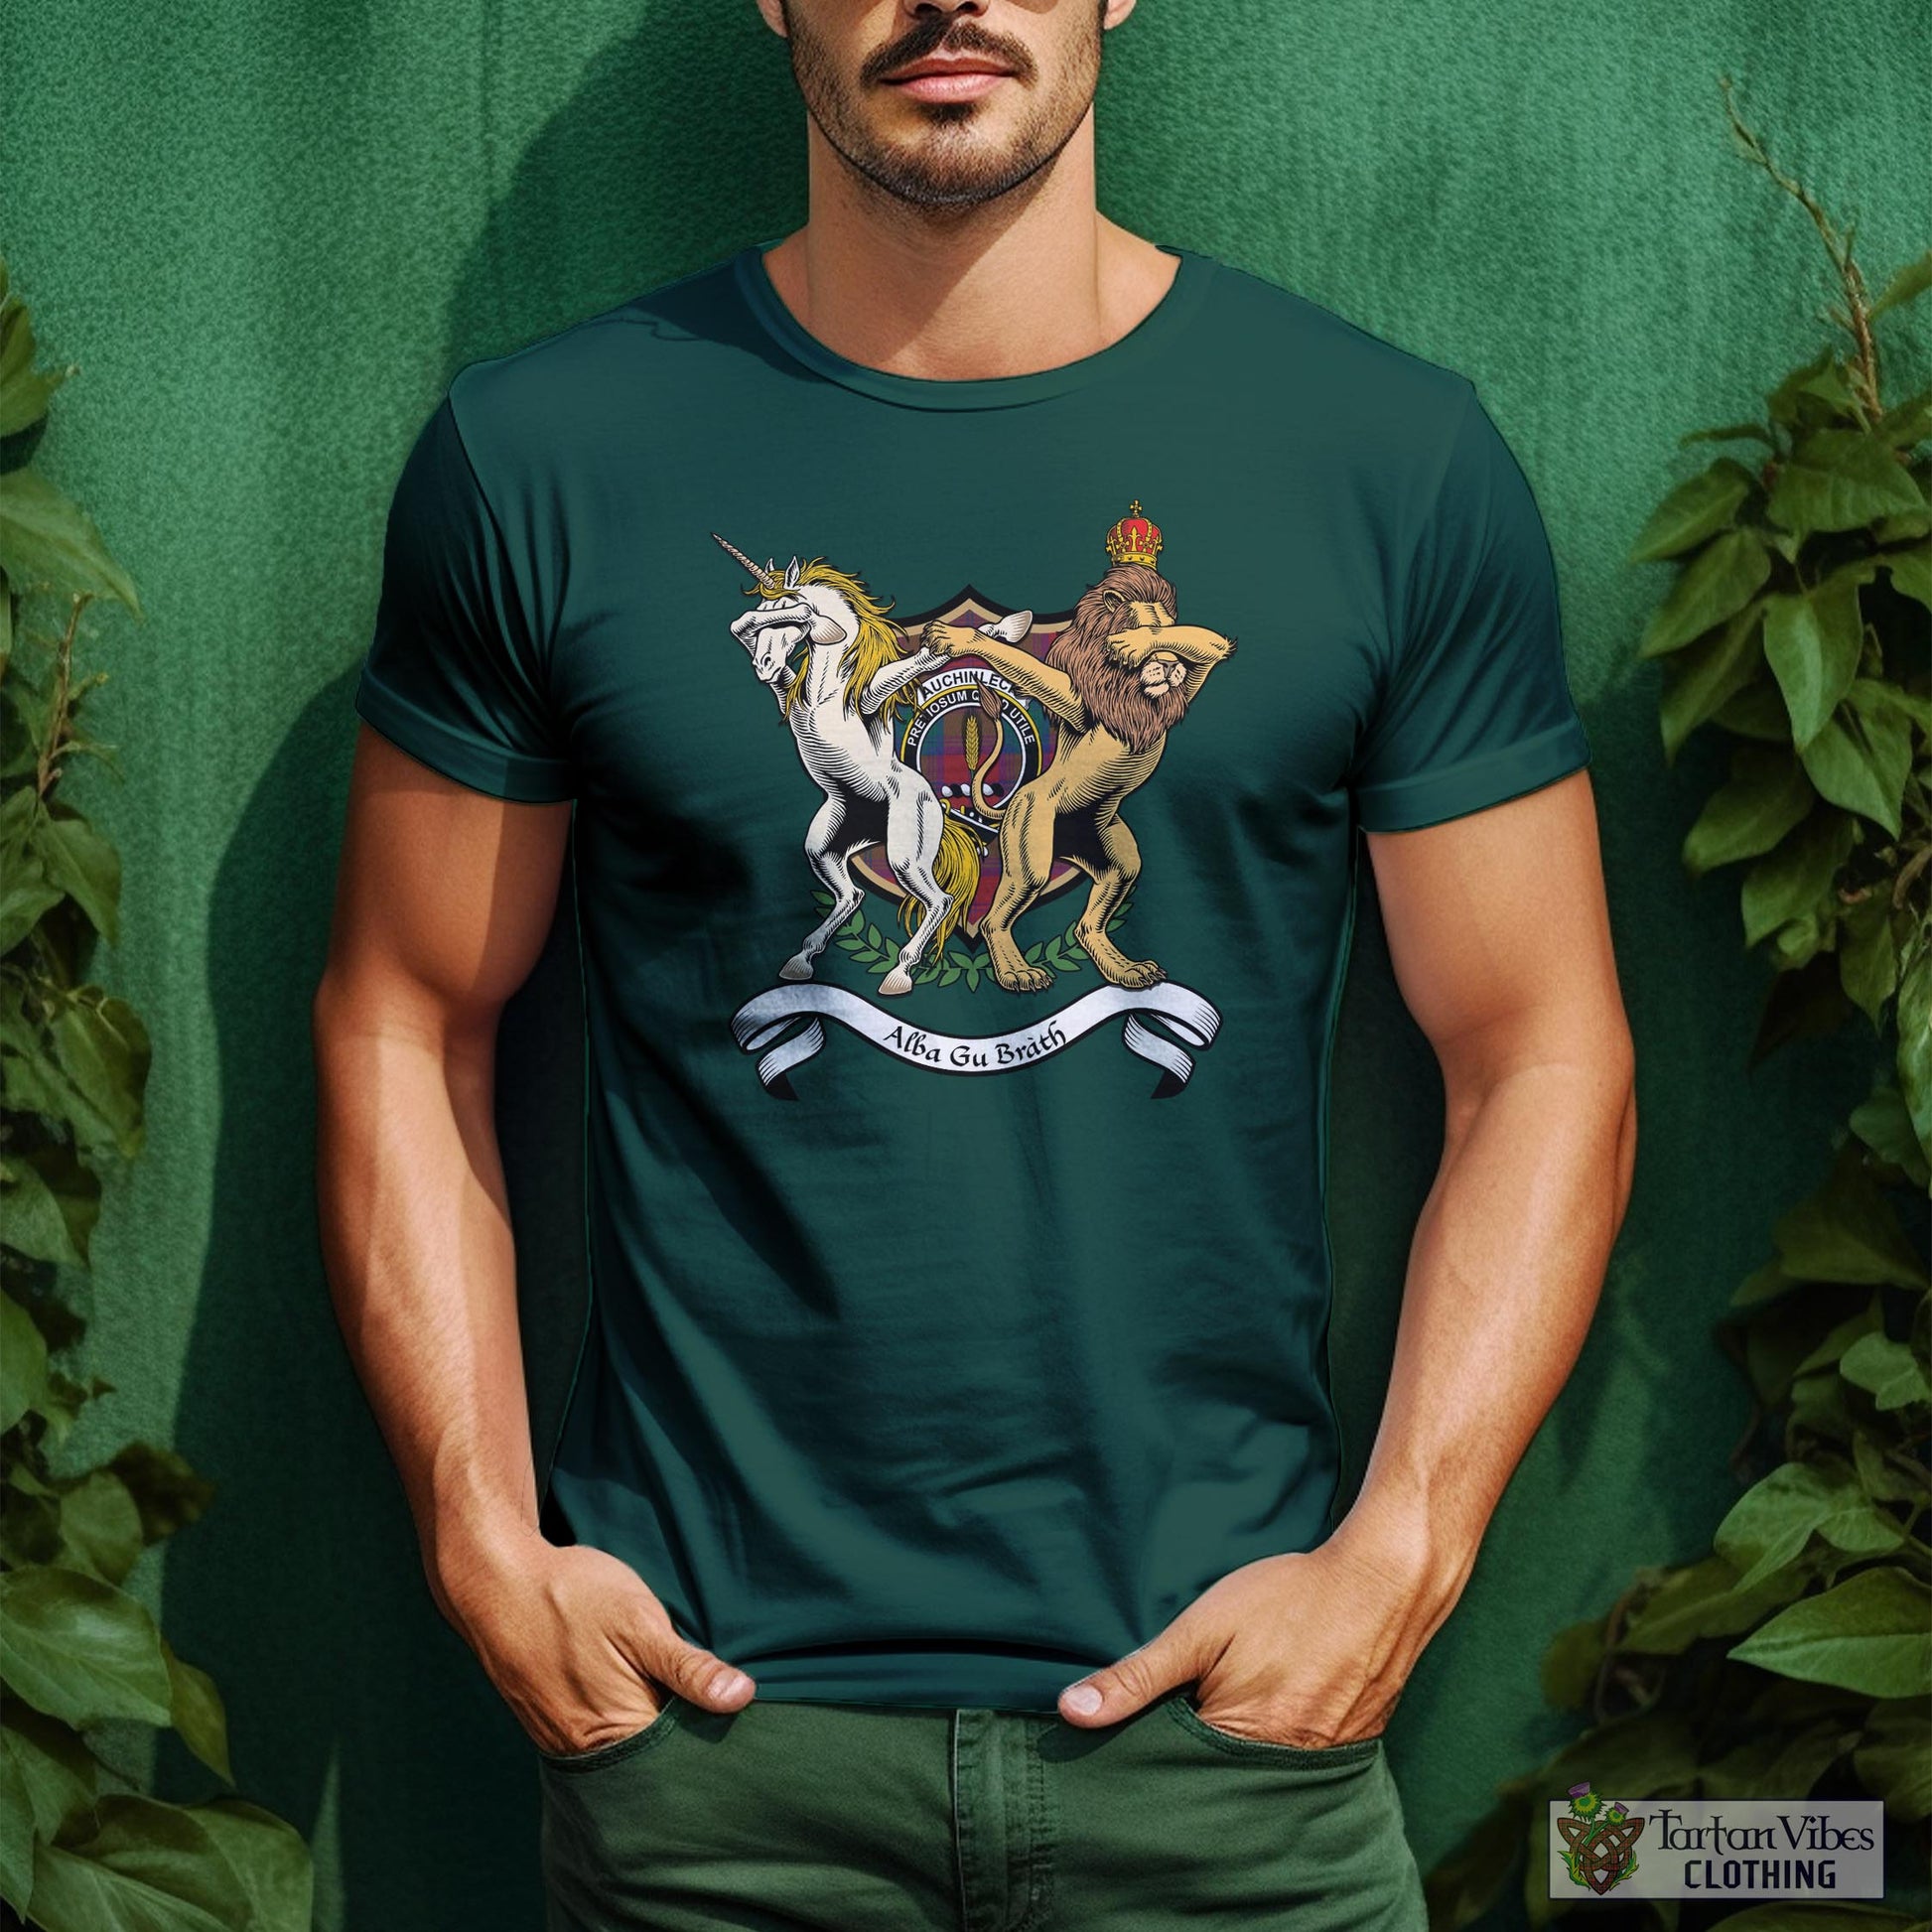 Tartan Vibes Clothing Auchinleck Family Crest Cotton Men's T-Shirt with Scotland Royal Coat Of Arm Funny Style